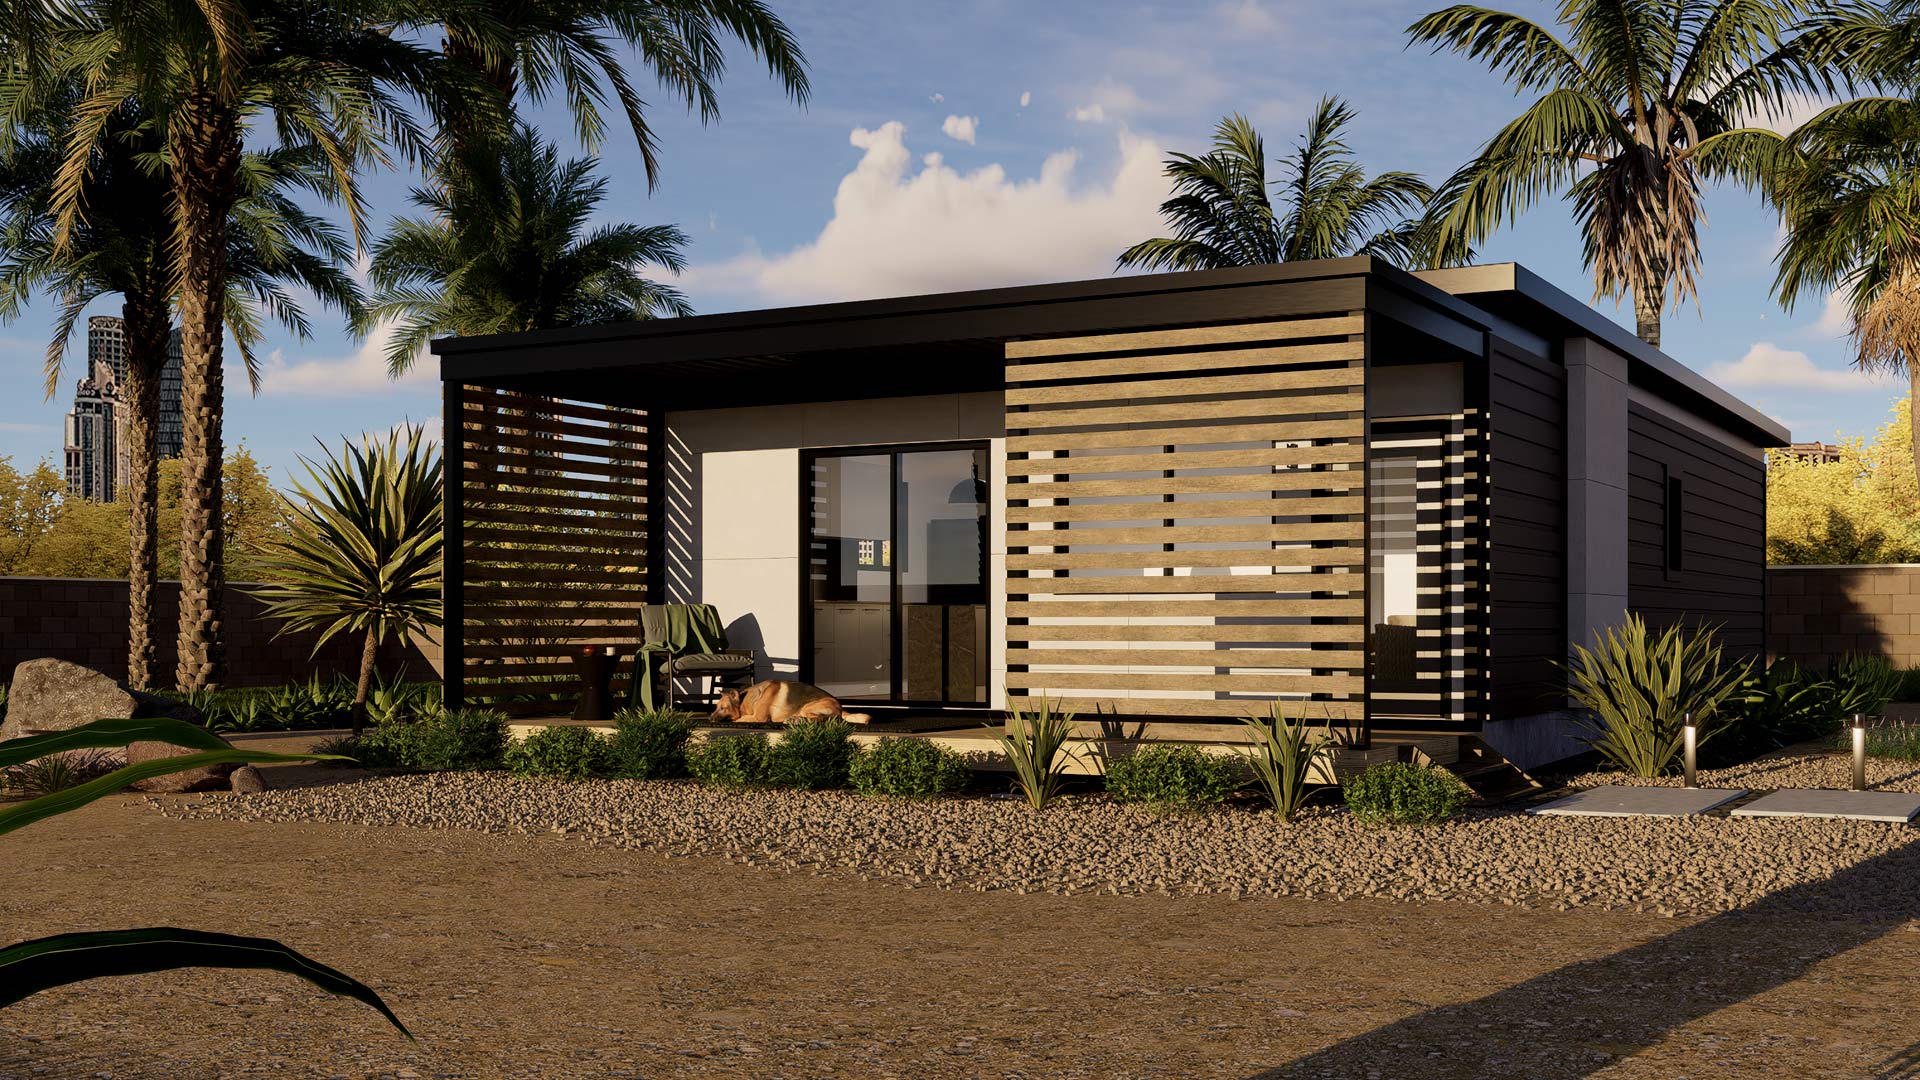 ADUs: From Granny Flats to the Next Big Thing in Housing